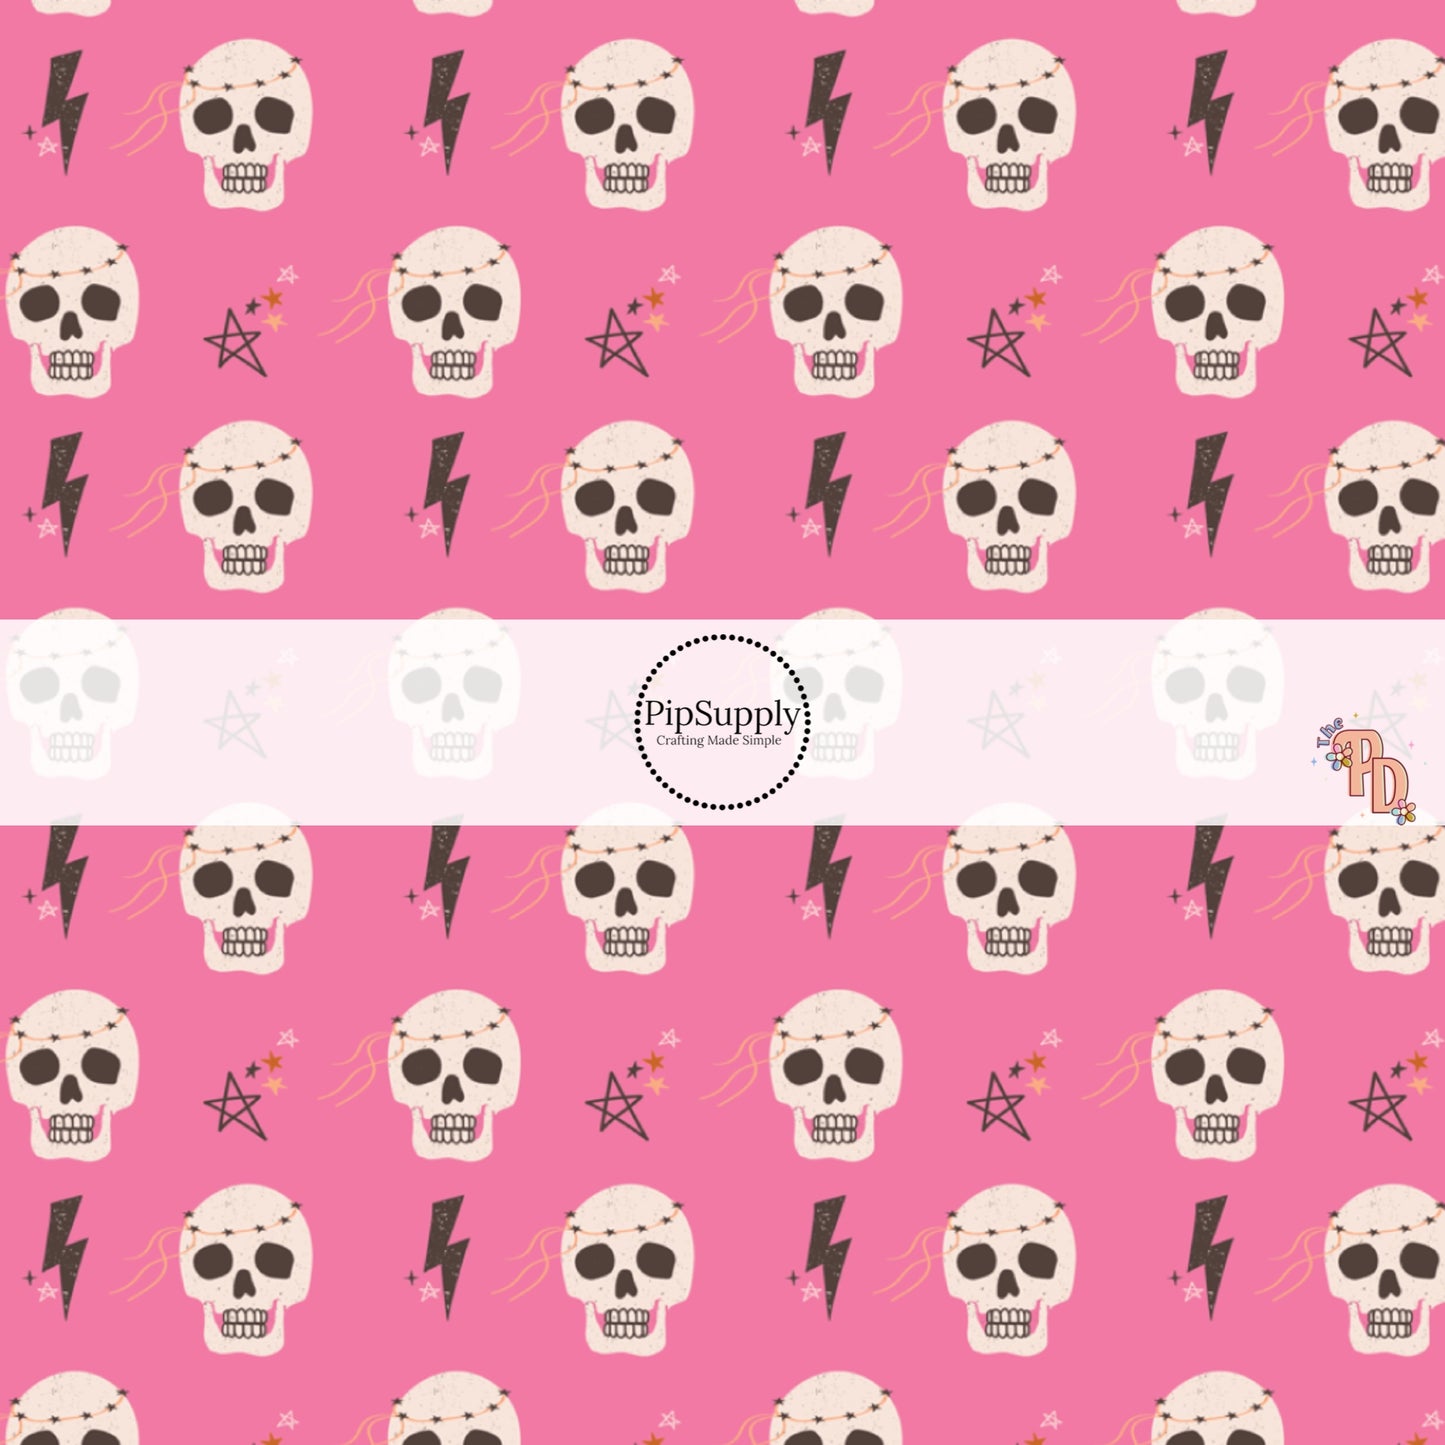 Skulls and bolts on pink hair bow strips